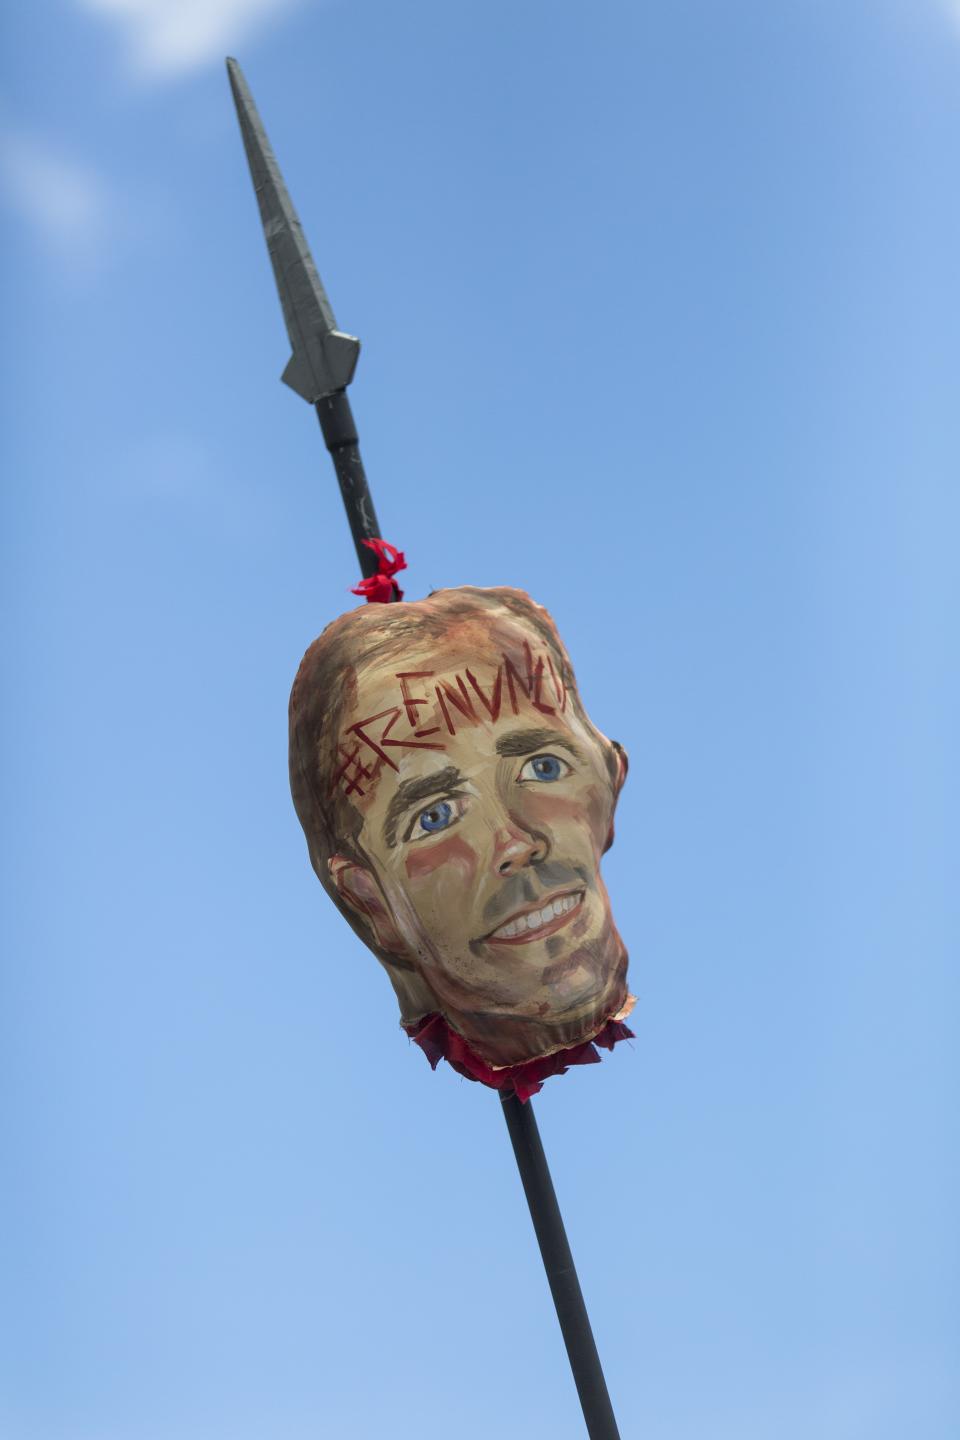 Demonstrators carry a image representing the head of Governor Ricardo Rossello on a pike, with an inscription on its forehead that reads in Spanish "Resign" during a march demanding the resignation of Governor Rossello, in San Juan, Puerto Rico, Monday, July 22, 2019. Protesters are demanding Rossello step down for his involvement in a private chat in which I have used profanities to describe an ex-New York City councilwoman and a federal control board overseeing the island's finance. (AP Photo / Dennis M. Rivera Pichardo)